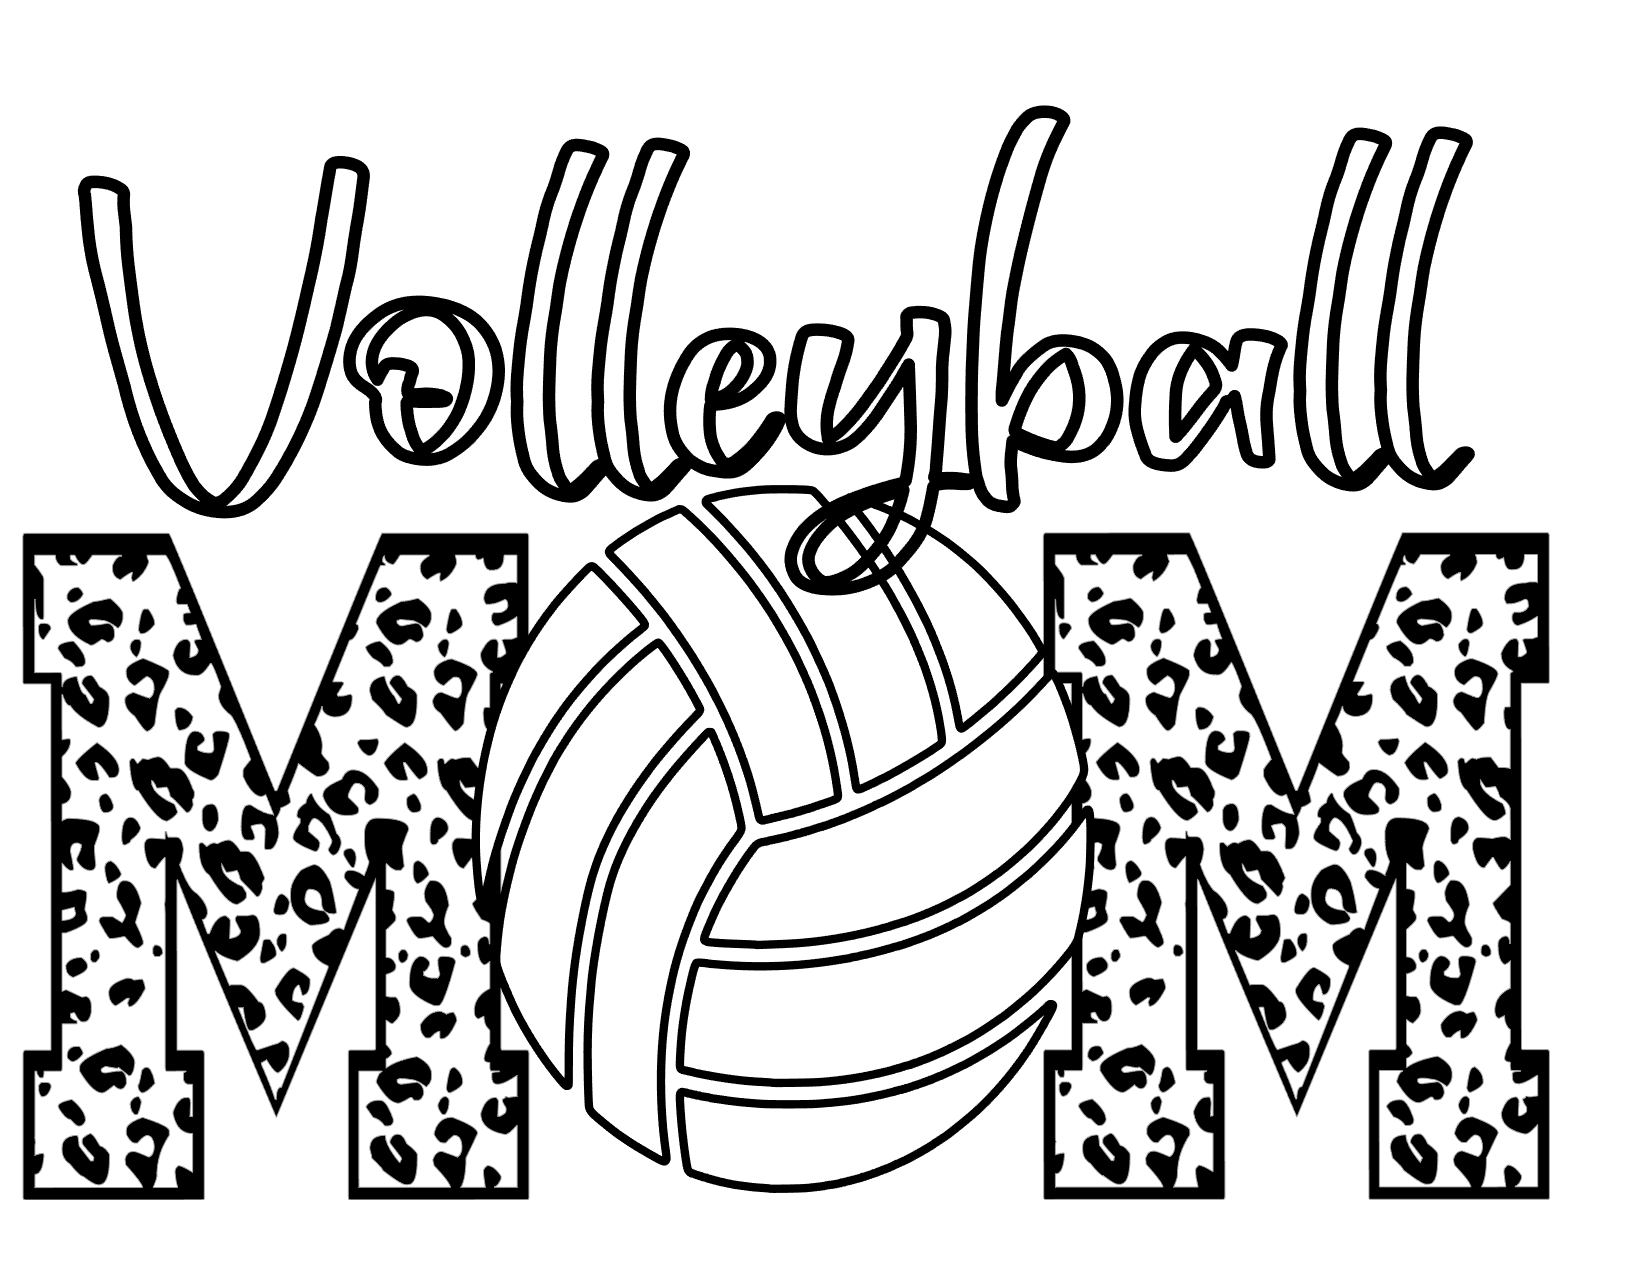 #178 Volleyball Mom(can me any name)